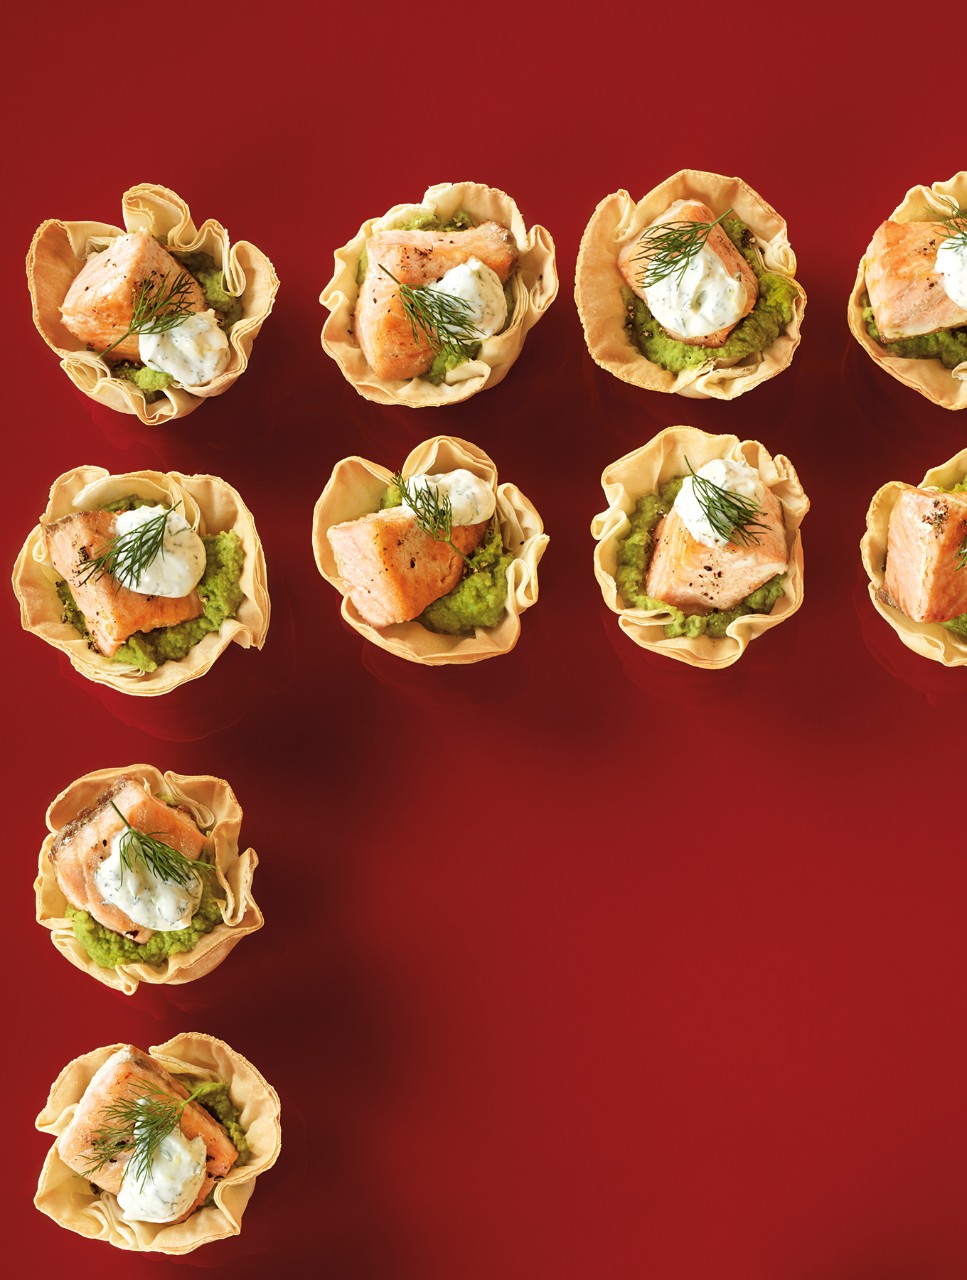 Baked Salmon in Phyllo Cups with Garlic Pea Purée & Dilled Cream